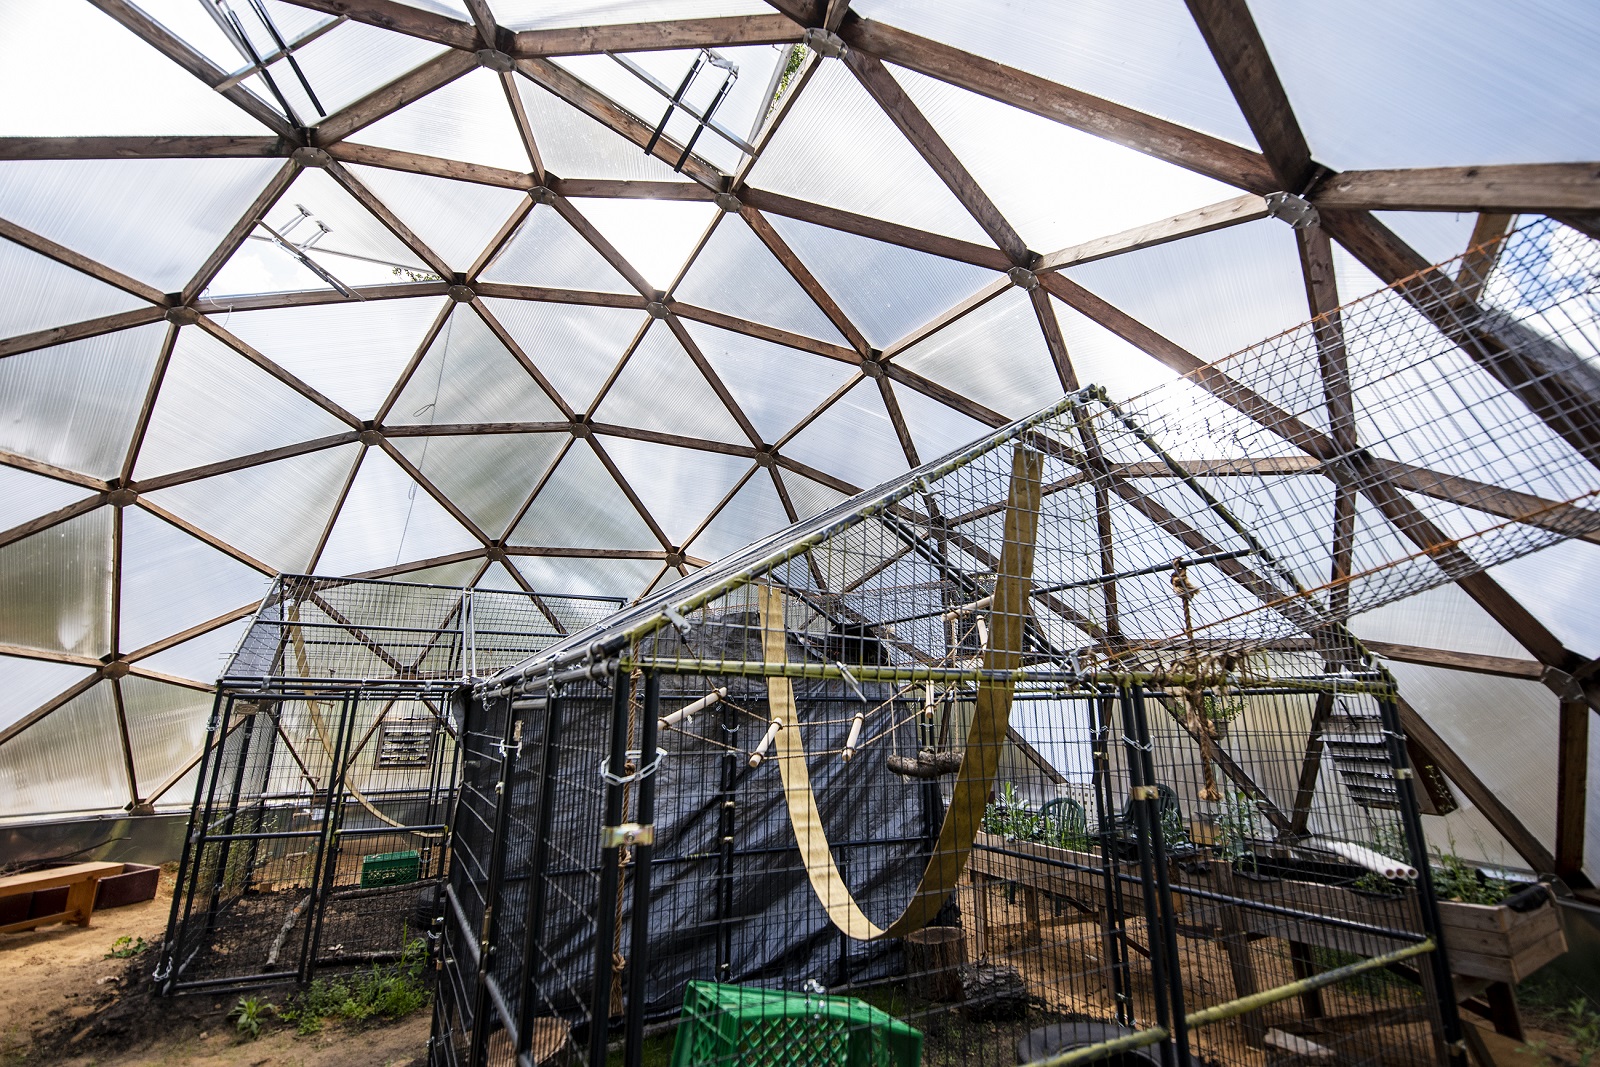 Monkeys at Primates Inc. can travel in and out of Geodomes through enclosed passageways.